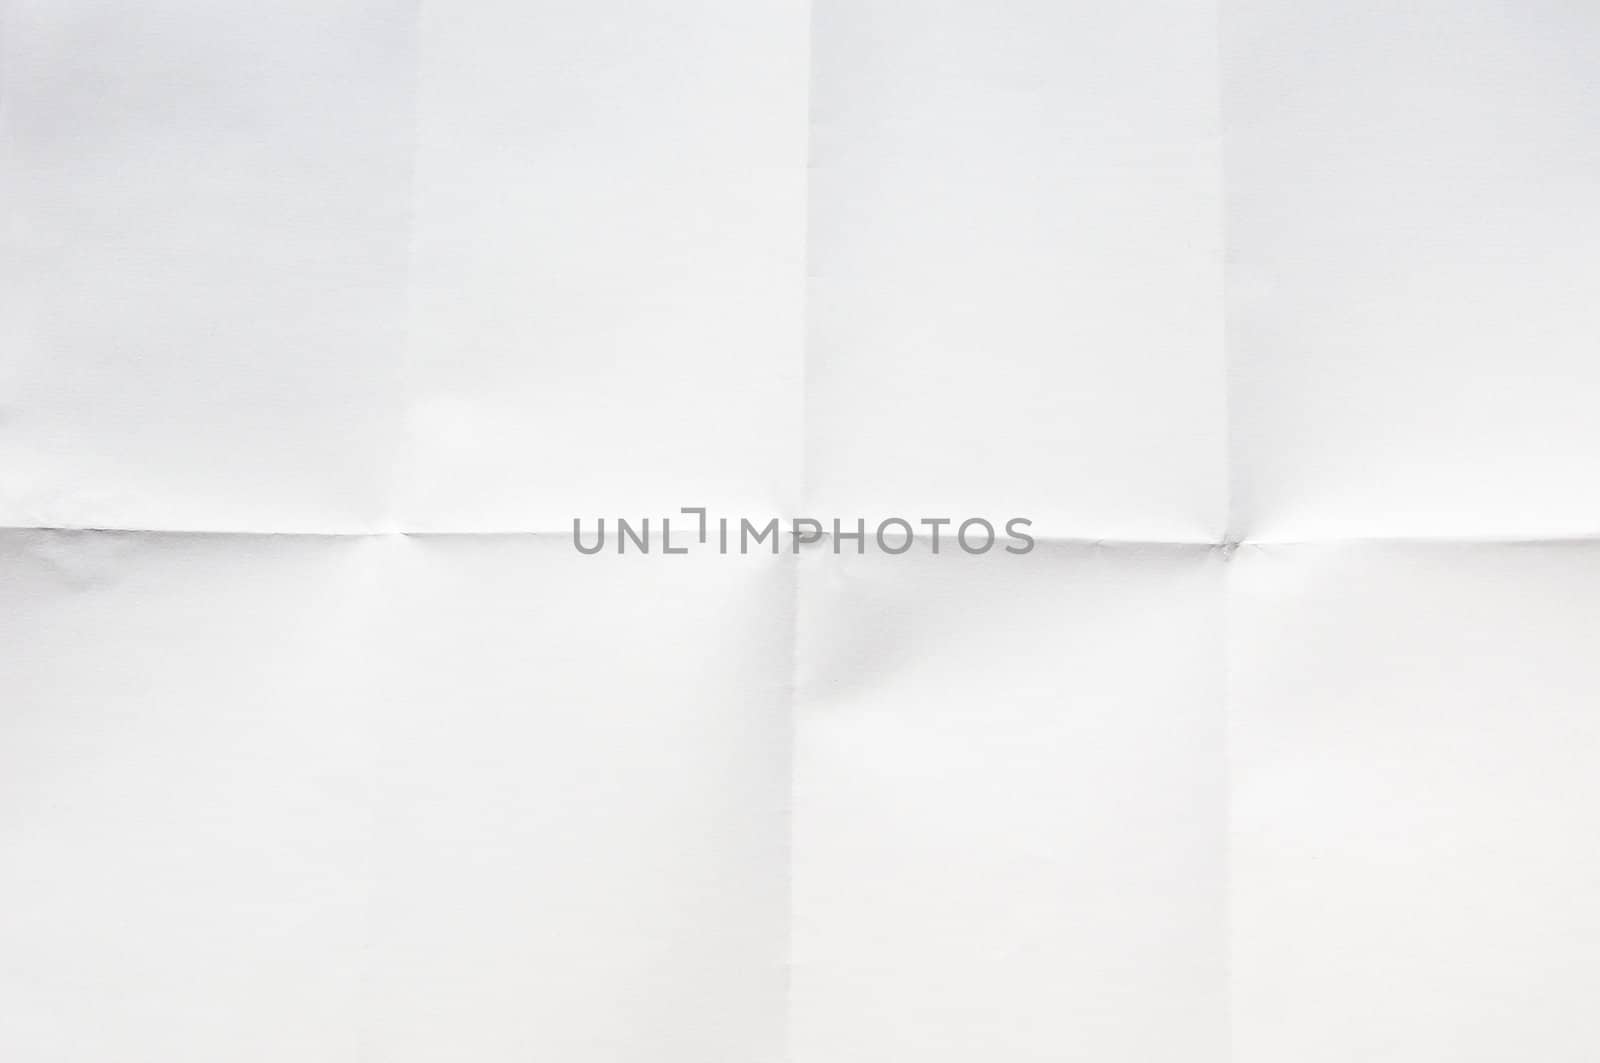 A Black Unfolded Used Paper Photo Ideal for Background Use